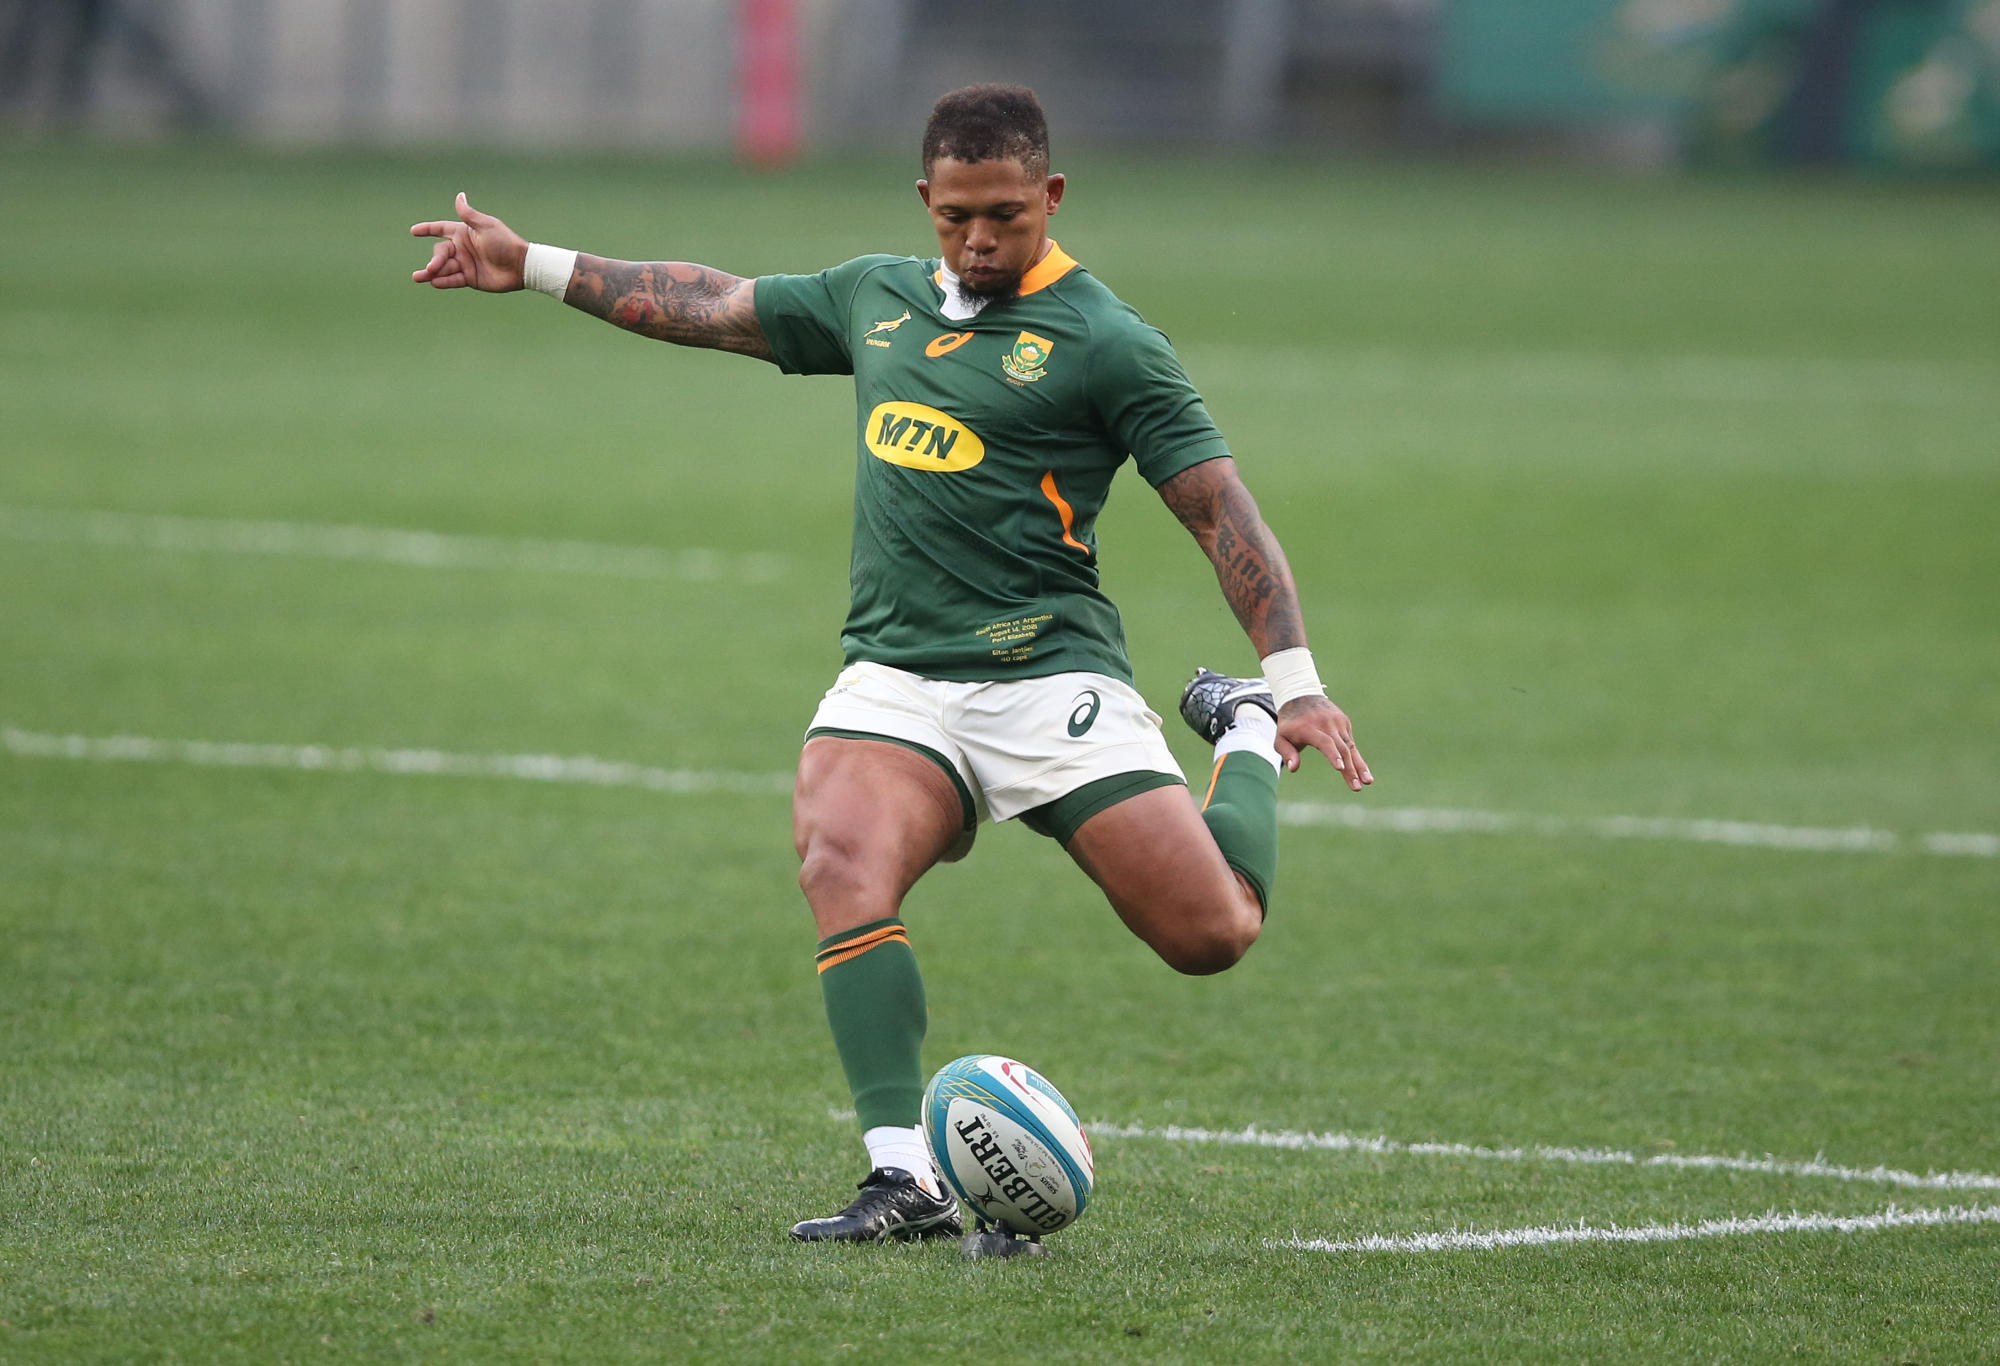 Elton Jantjies of South Africa takes a penalty kick